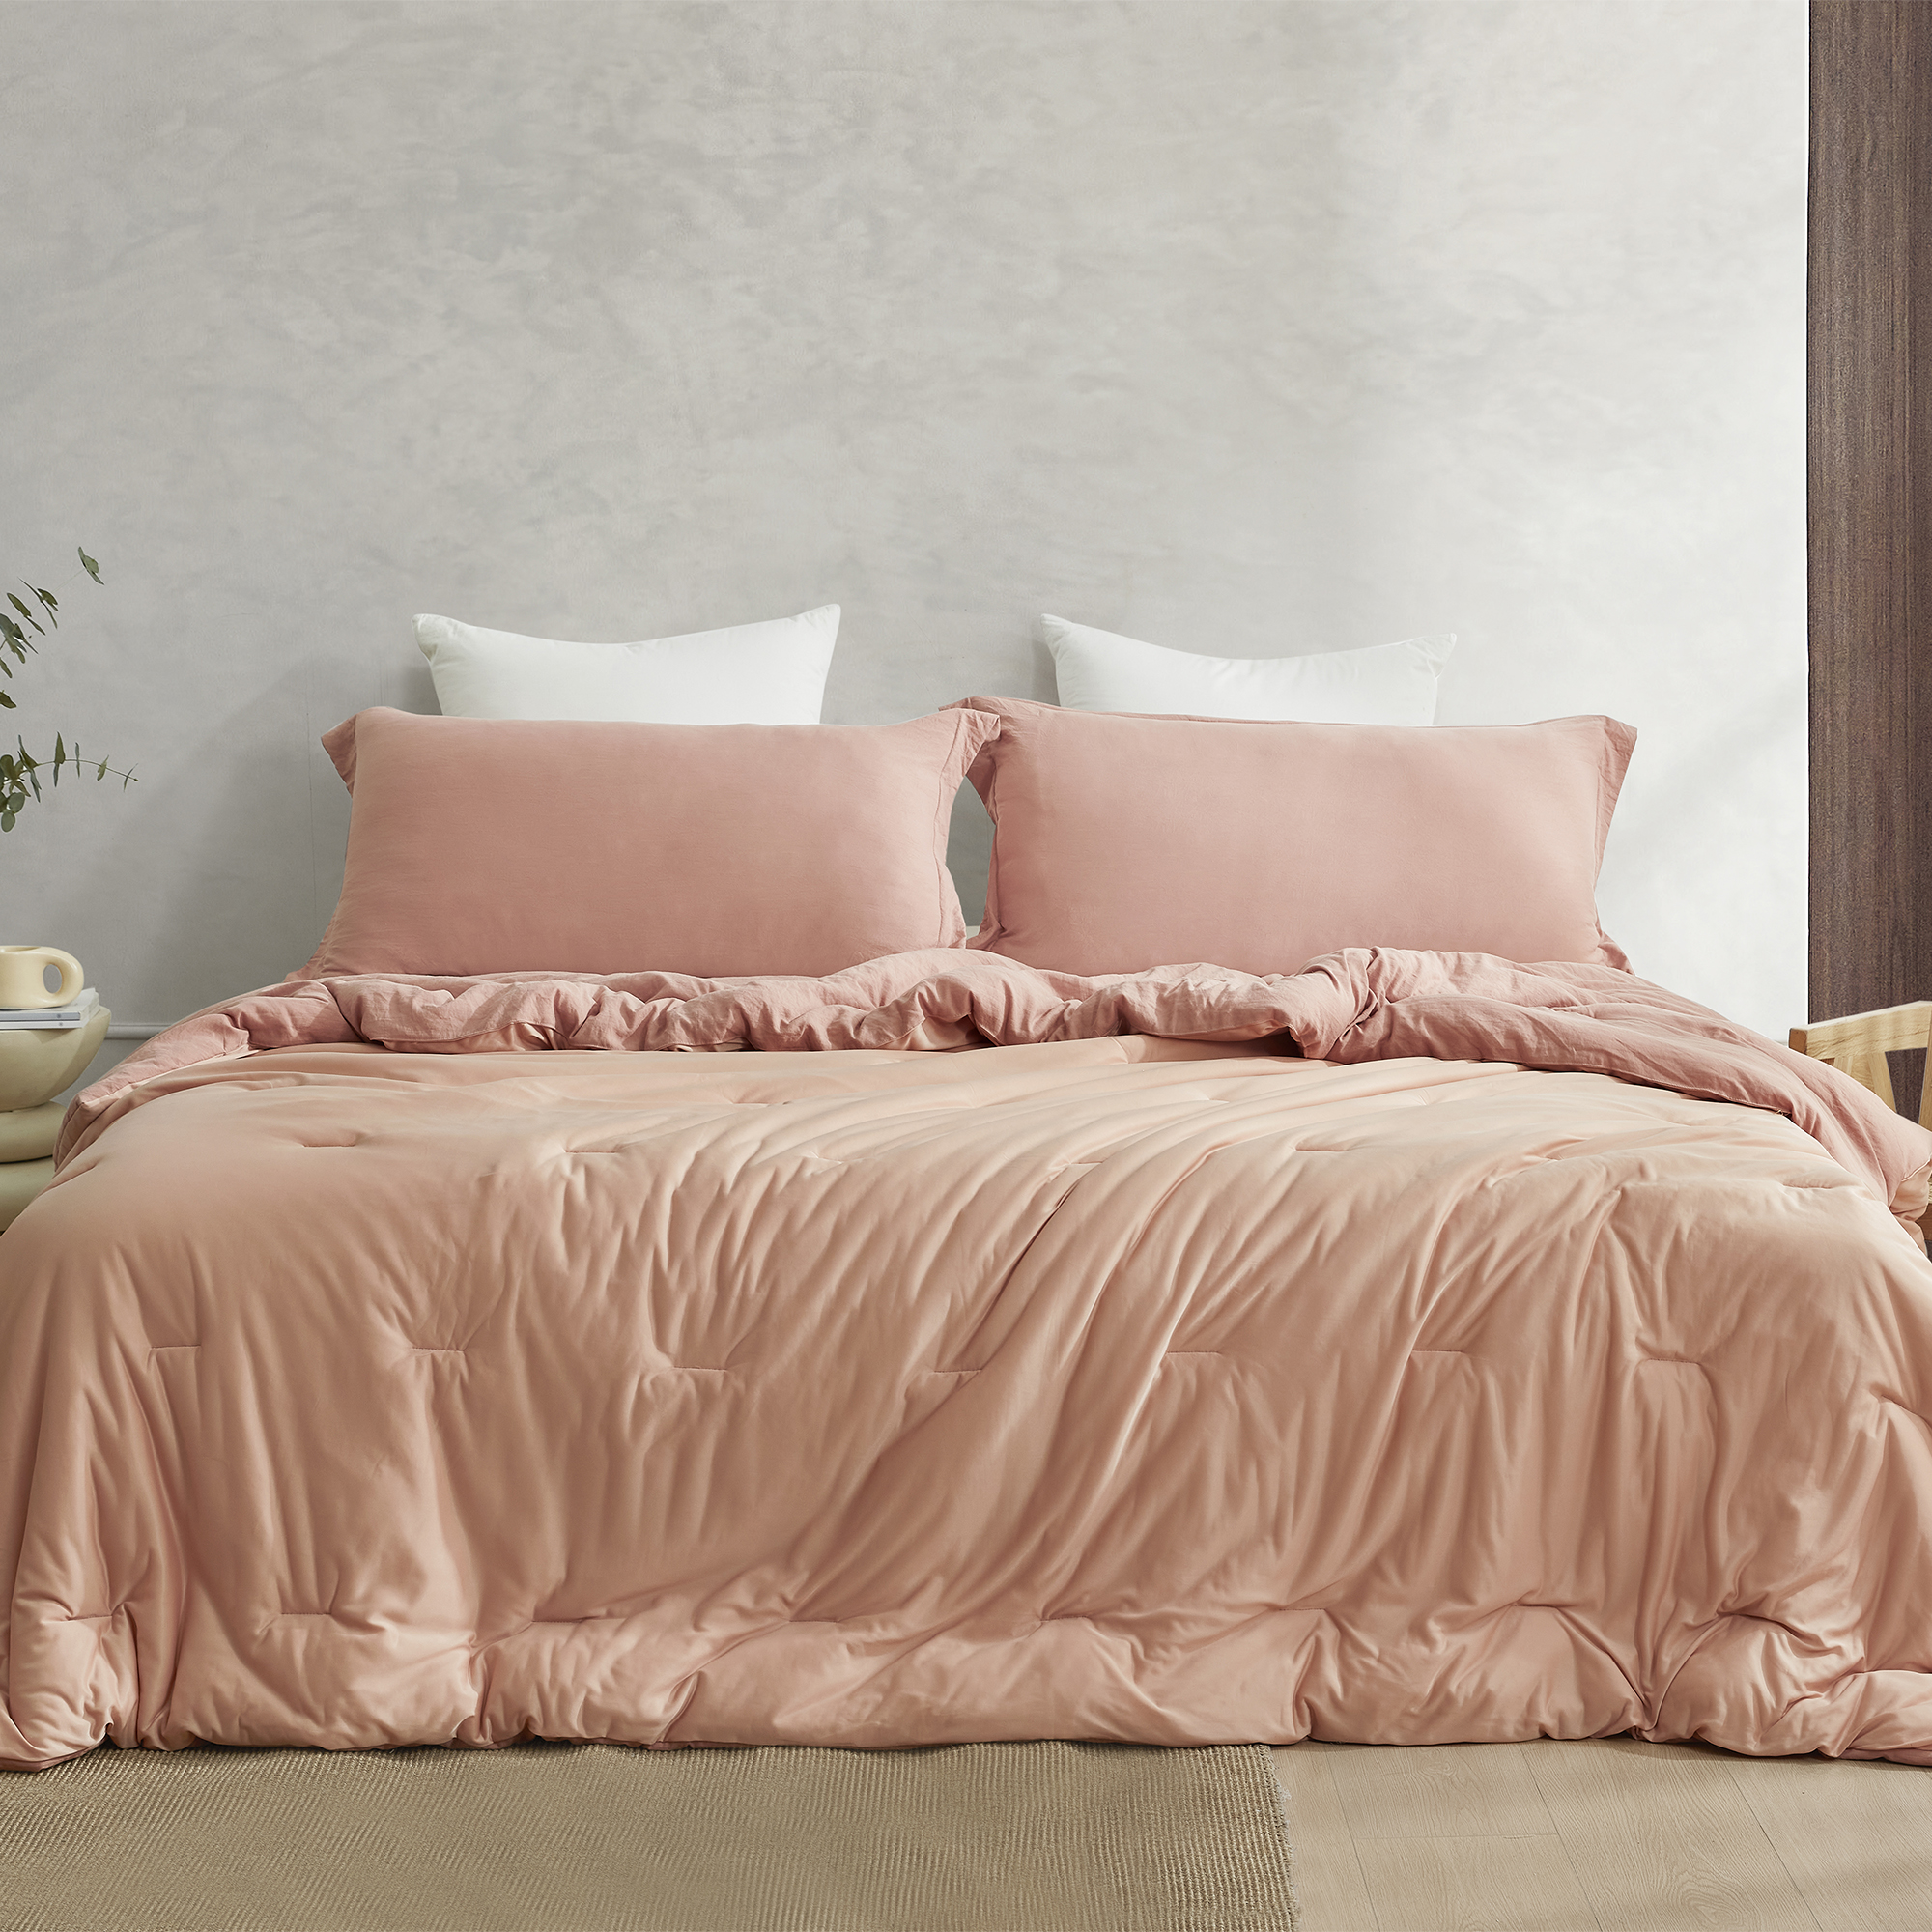 Calm Cool Collection - Coma Inducer® Oversized King Comforter - Muted Clay